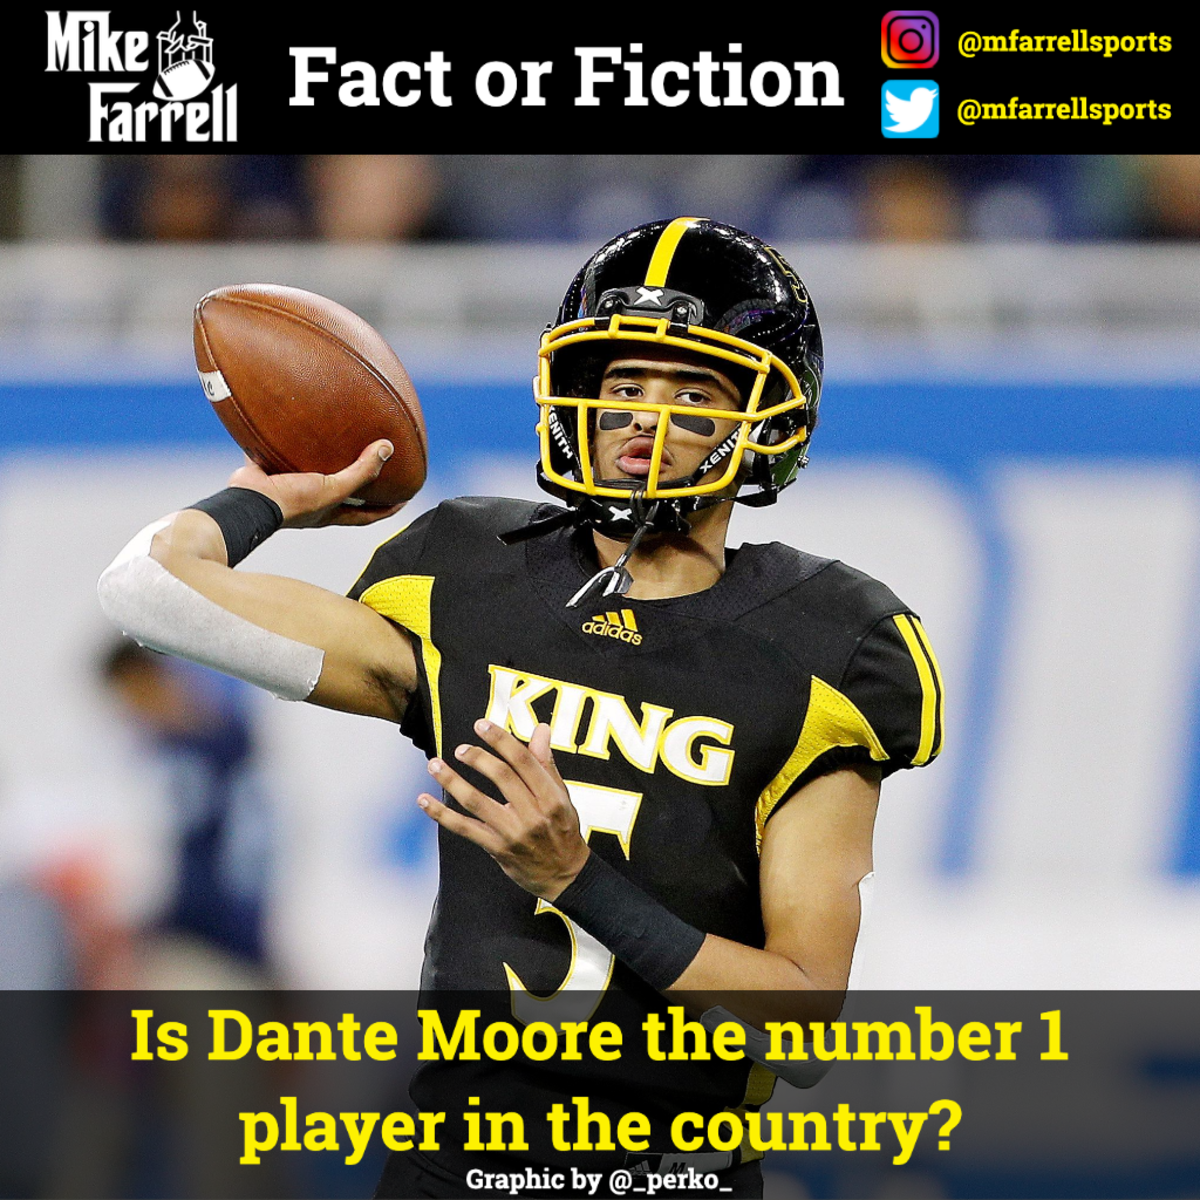 Fact or Fiction - Dante Moore